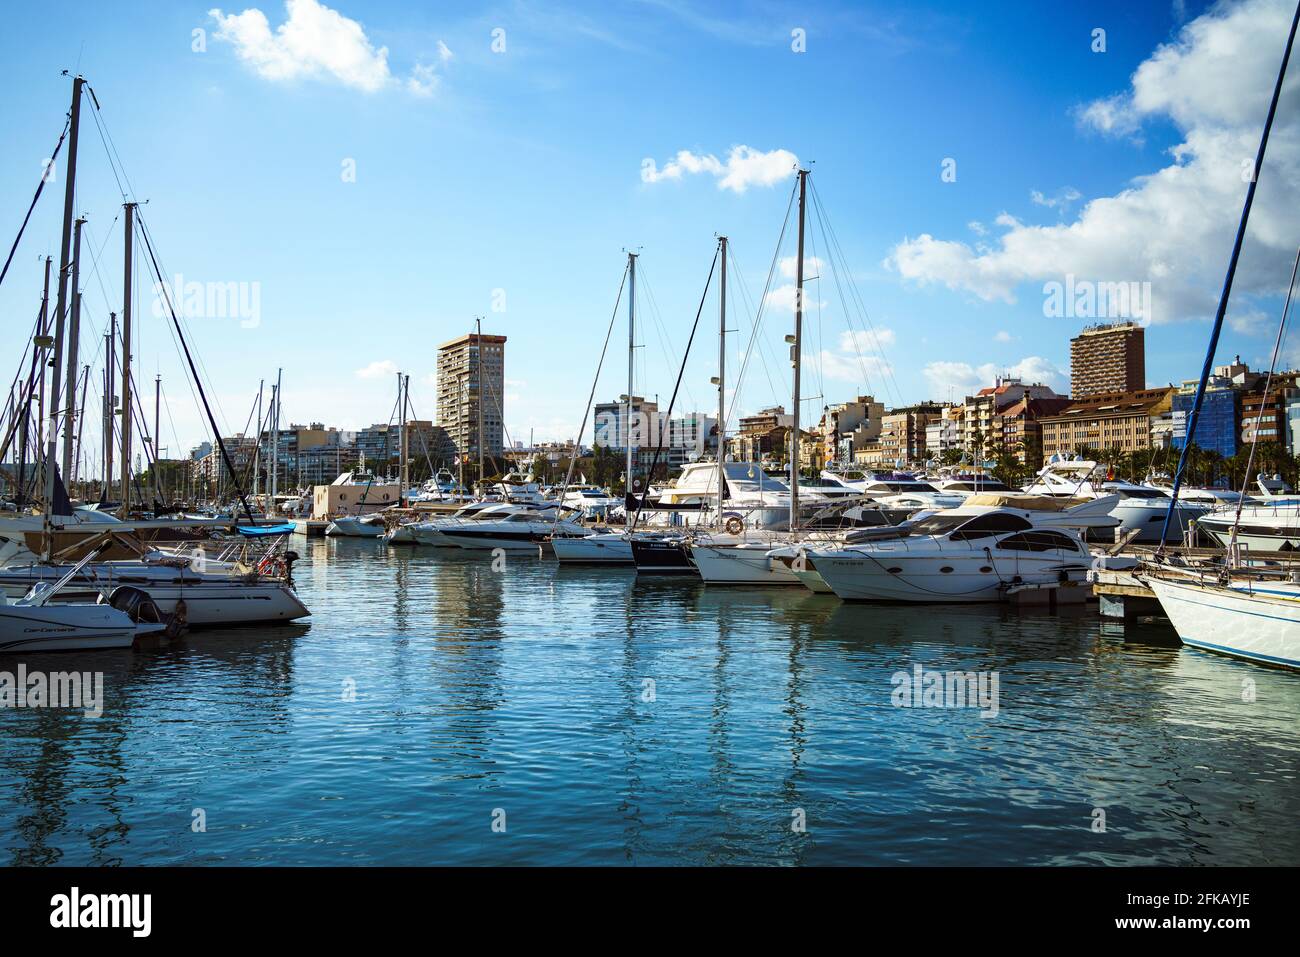 Alicante, Spain. November 21, 2020. Leisure yatchs in the recreational marina of Alicante. Sunny day. Stock Photo